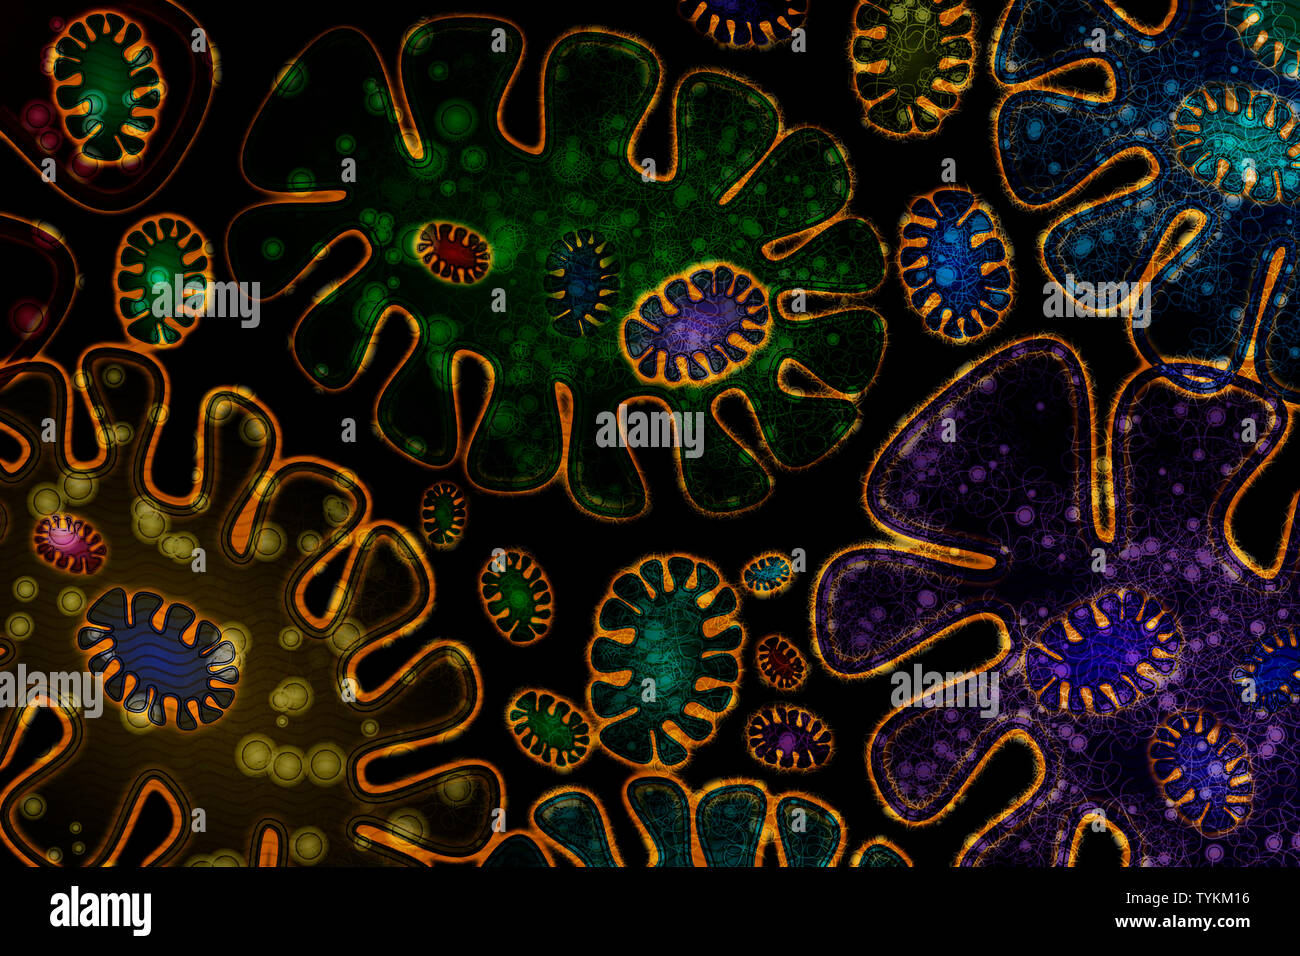 Synthetic Biology - Artificial Life - Abstract Illustration Stock Photo